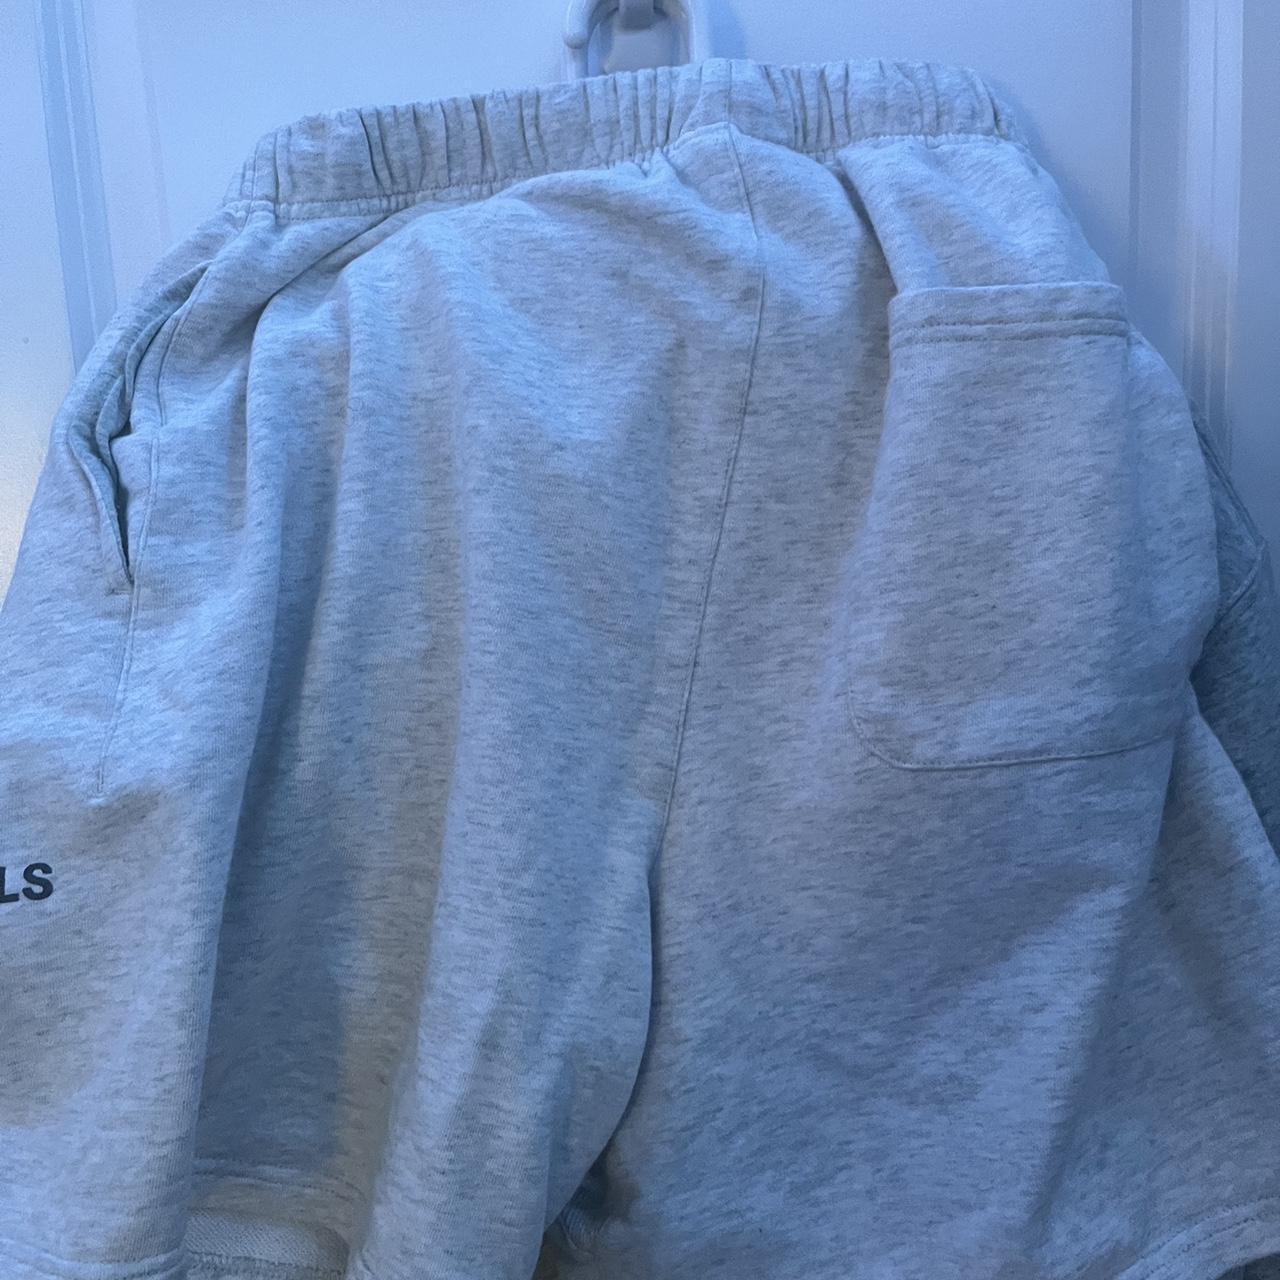 Men's Grey and White Shorts | Depop